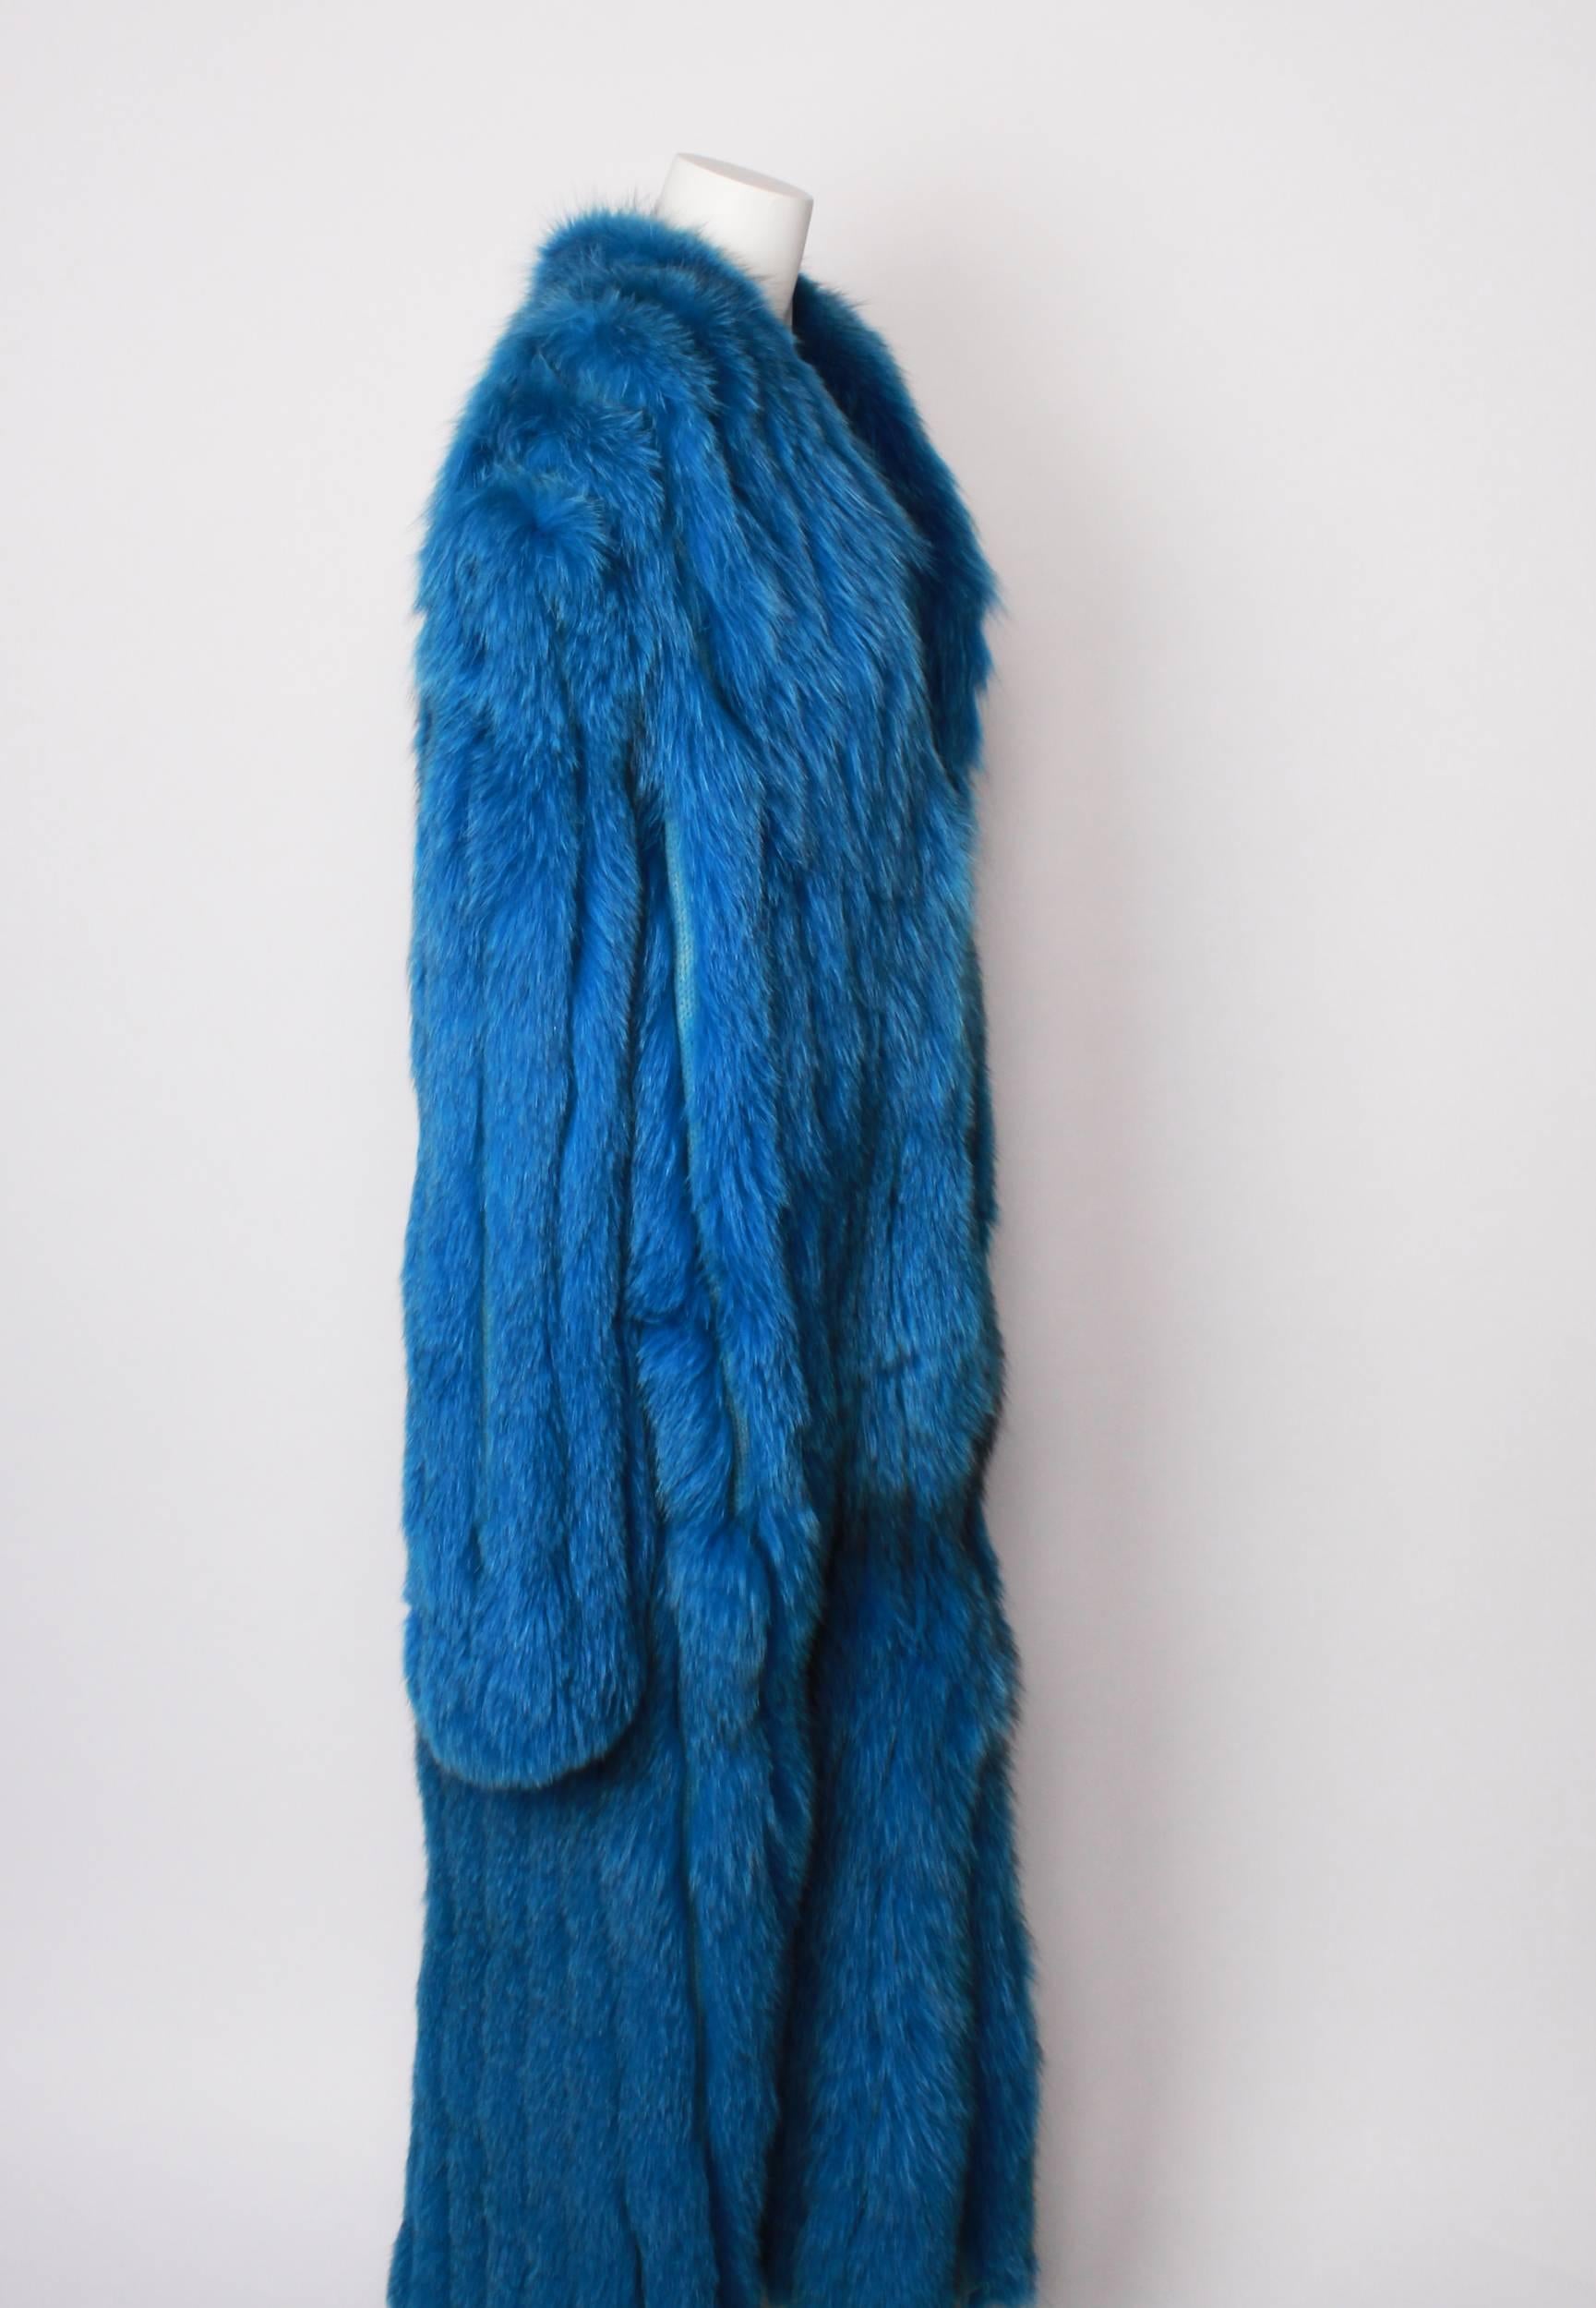 VINICIO PAJERO Full length turquoise blue ribbed fox fur coat. 
Luxurious and soft fox fur is craft-fully joined with contrast pale blue knitted panels. 
